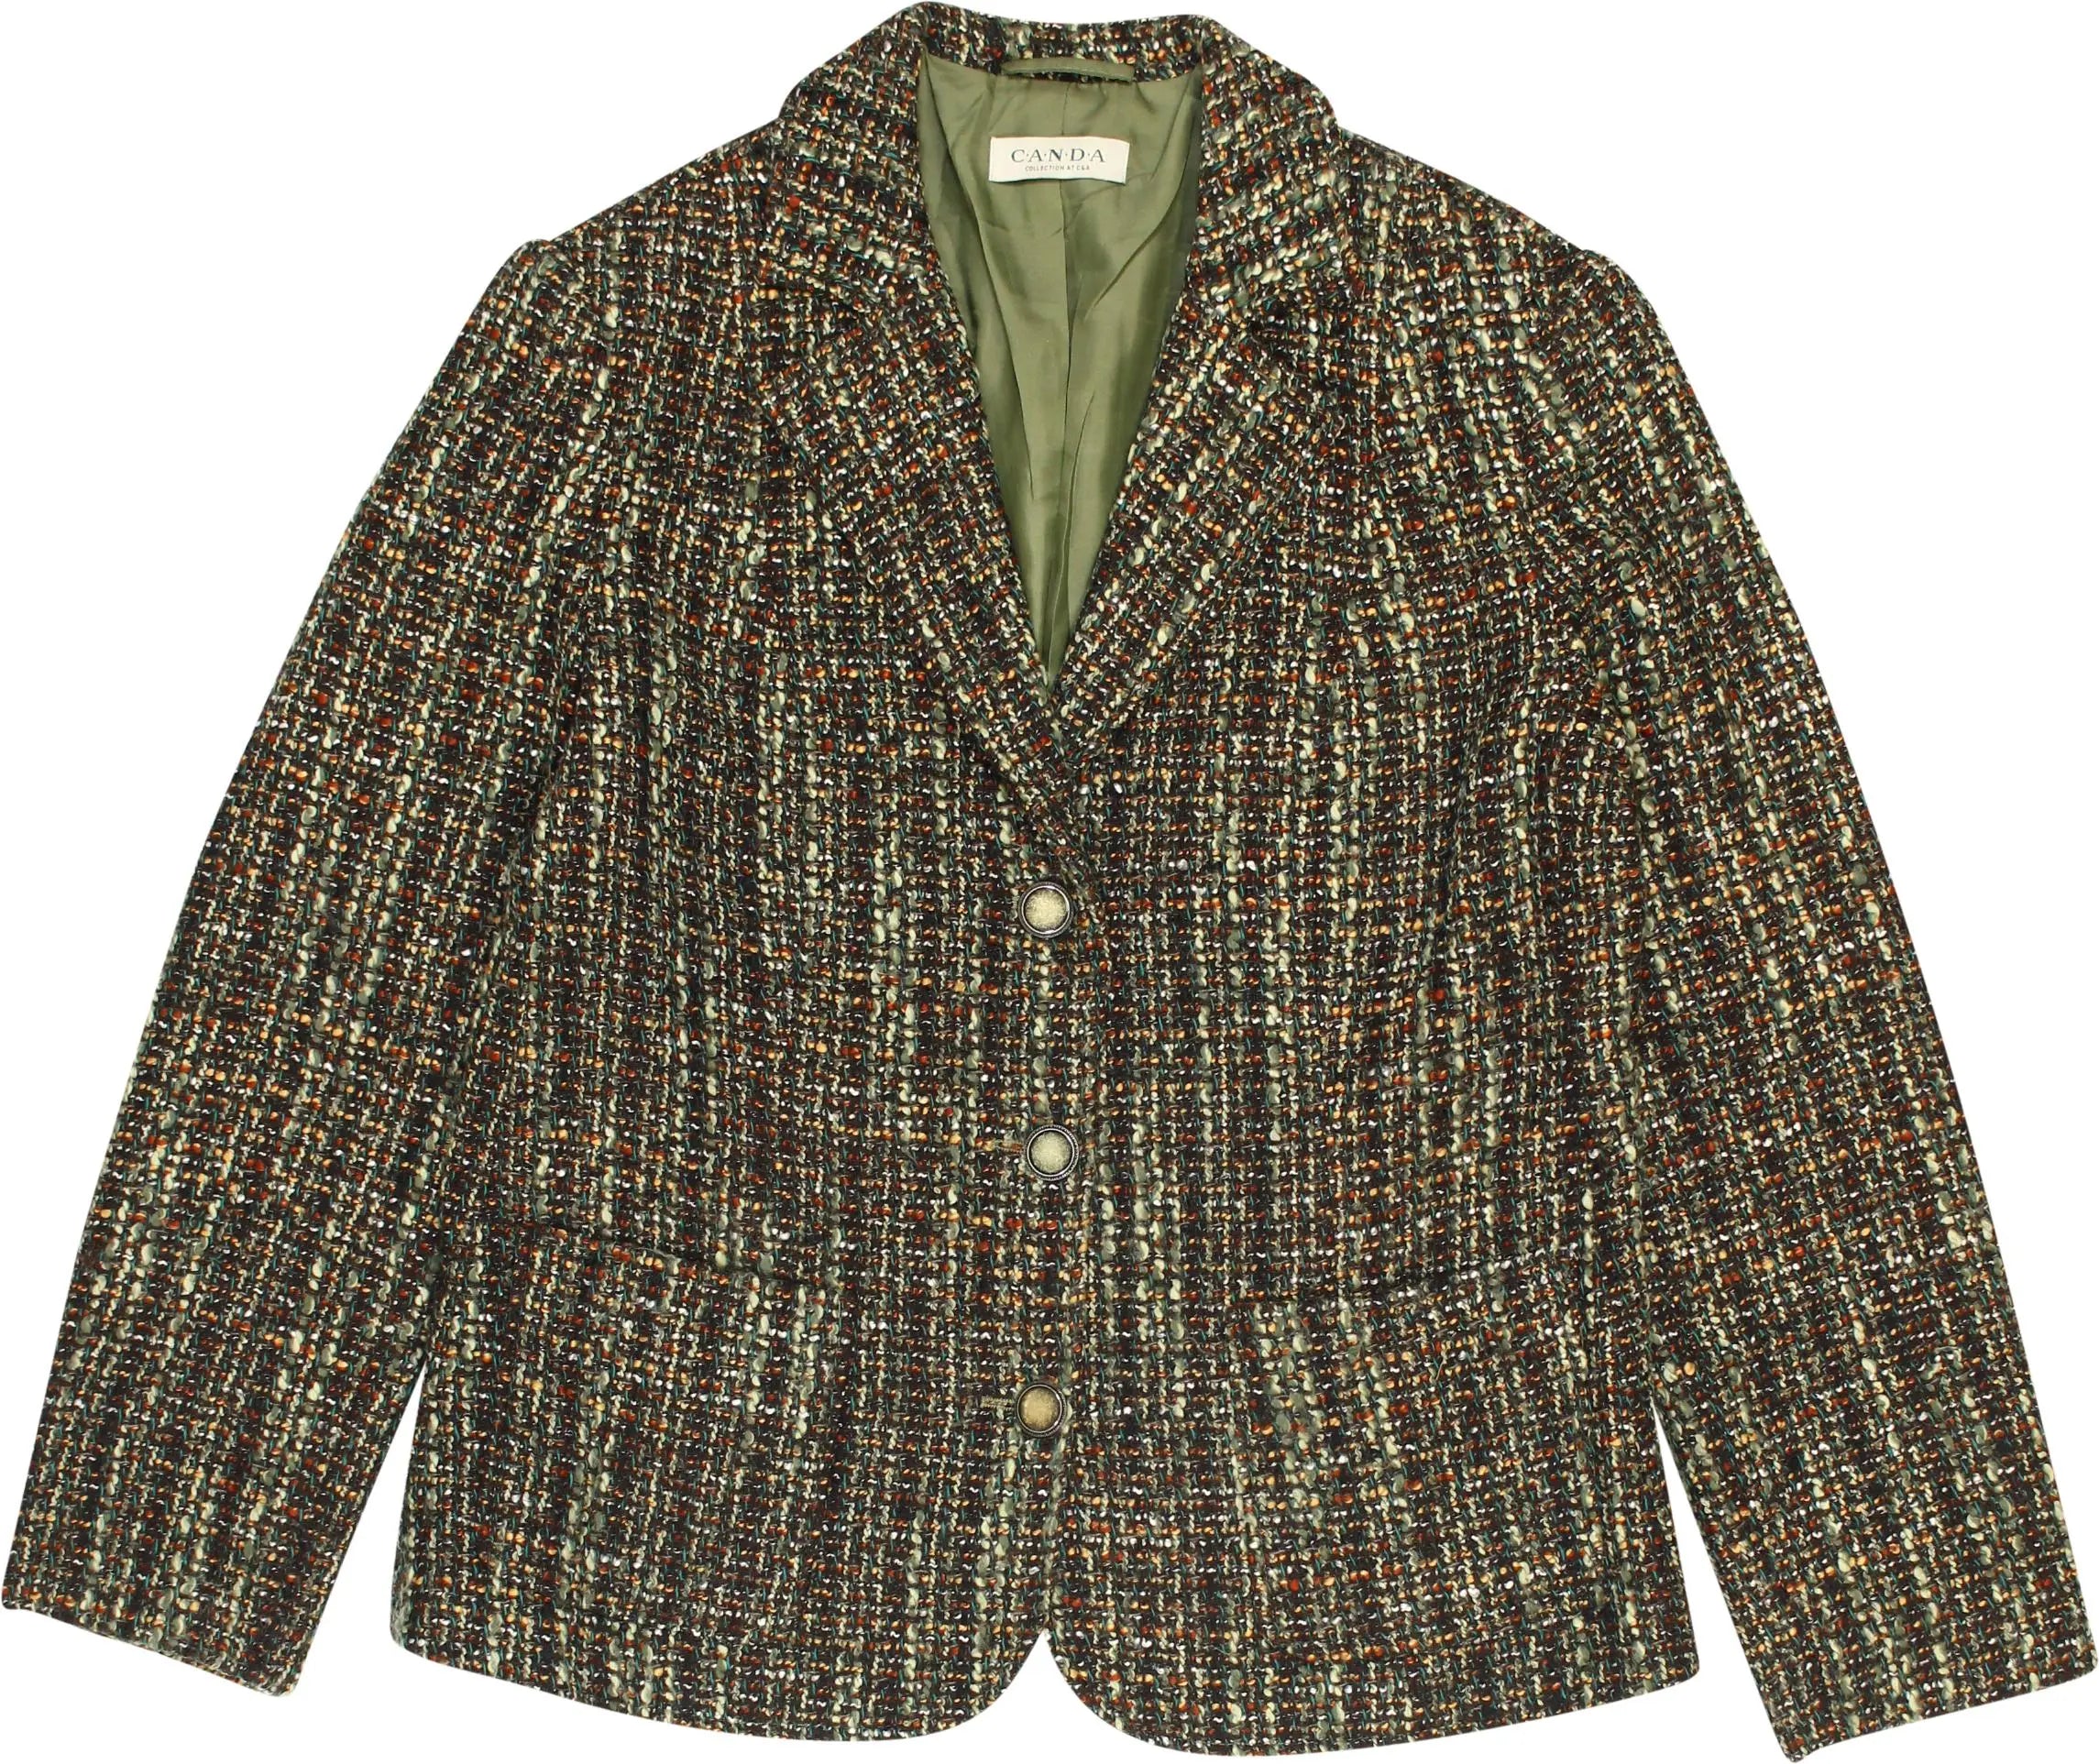 C&A - Tweed Blazer- ThriftTale.com - Vintage and second handclothing